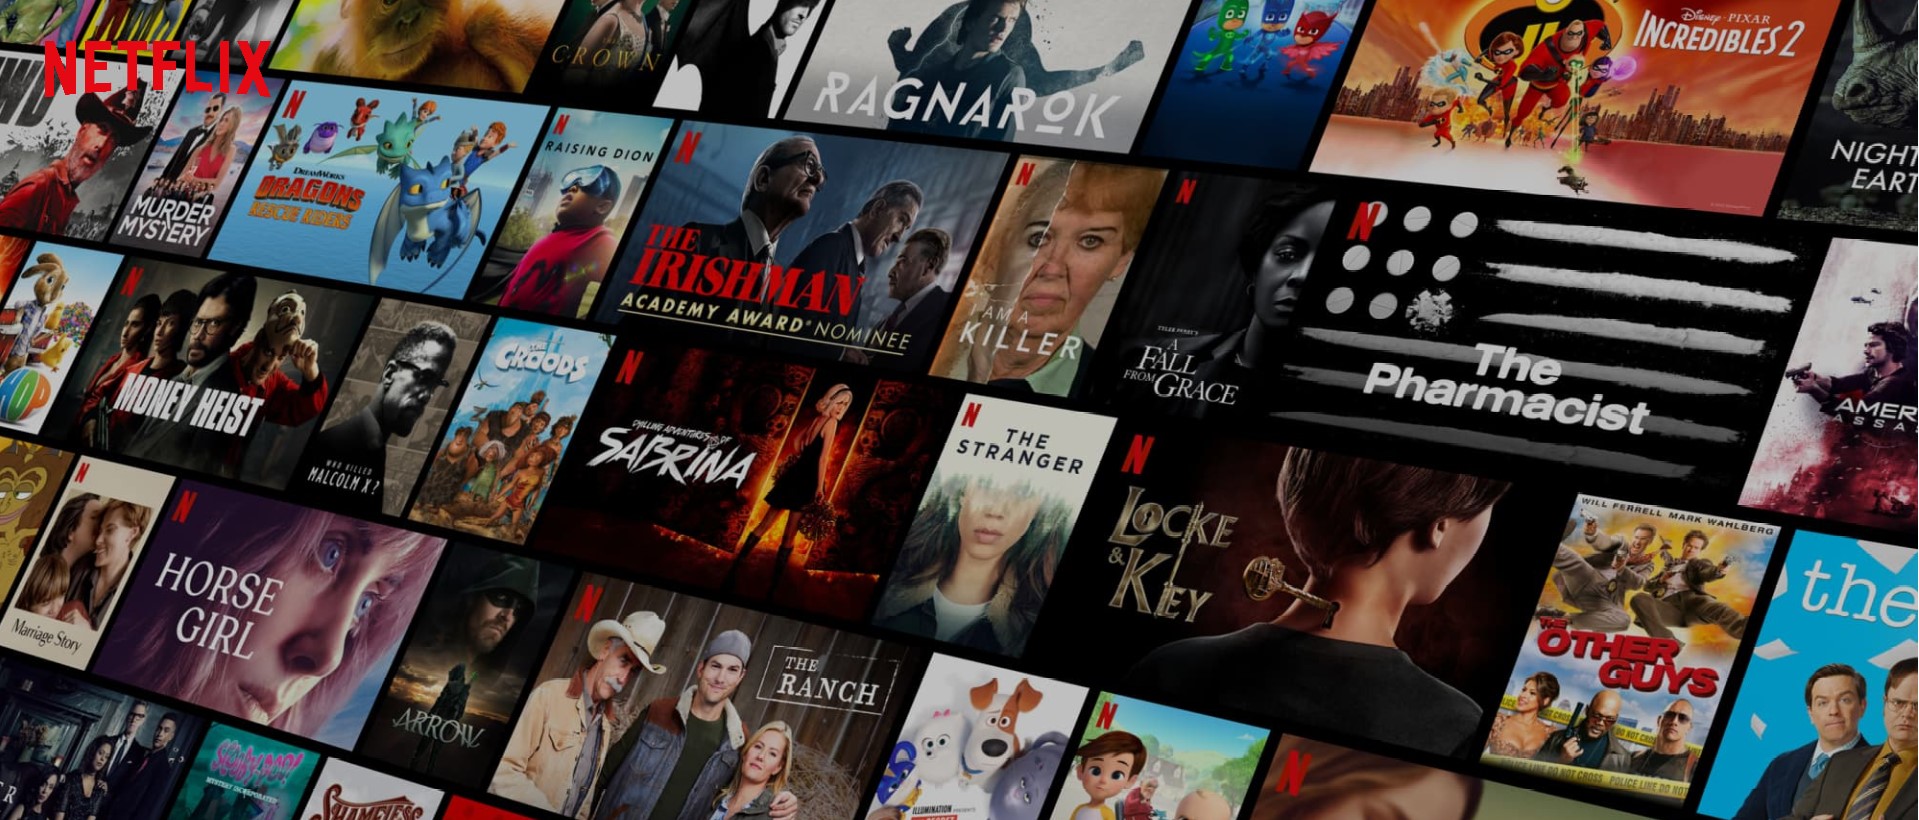 Download & Play Netflix on PC & Mac with NoxPlayer (Emulator)